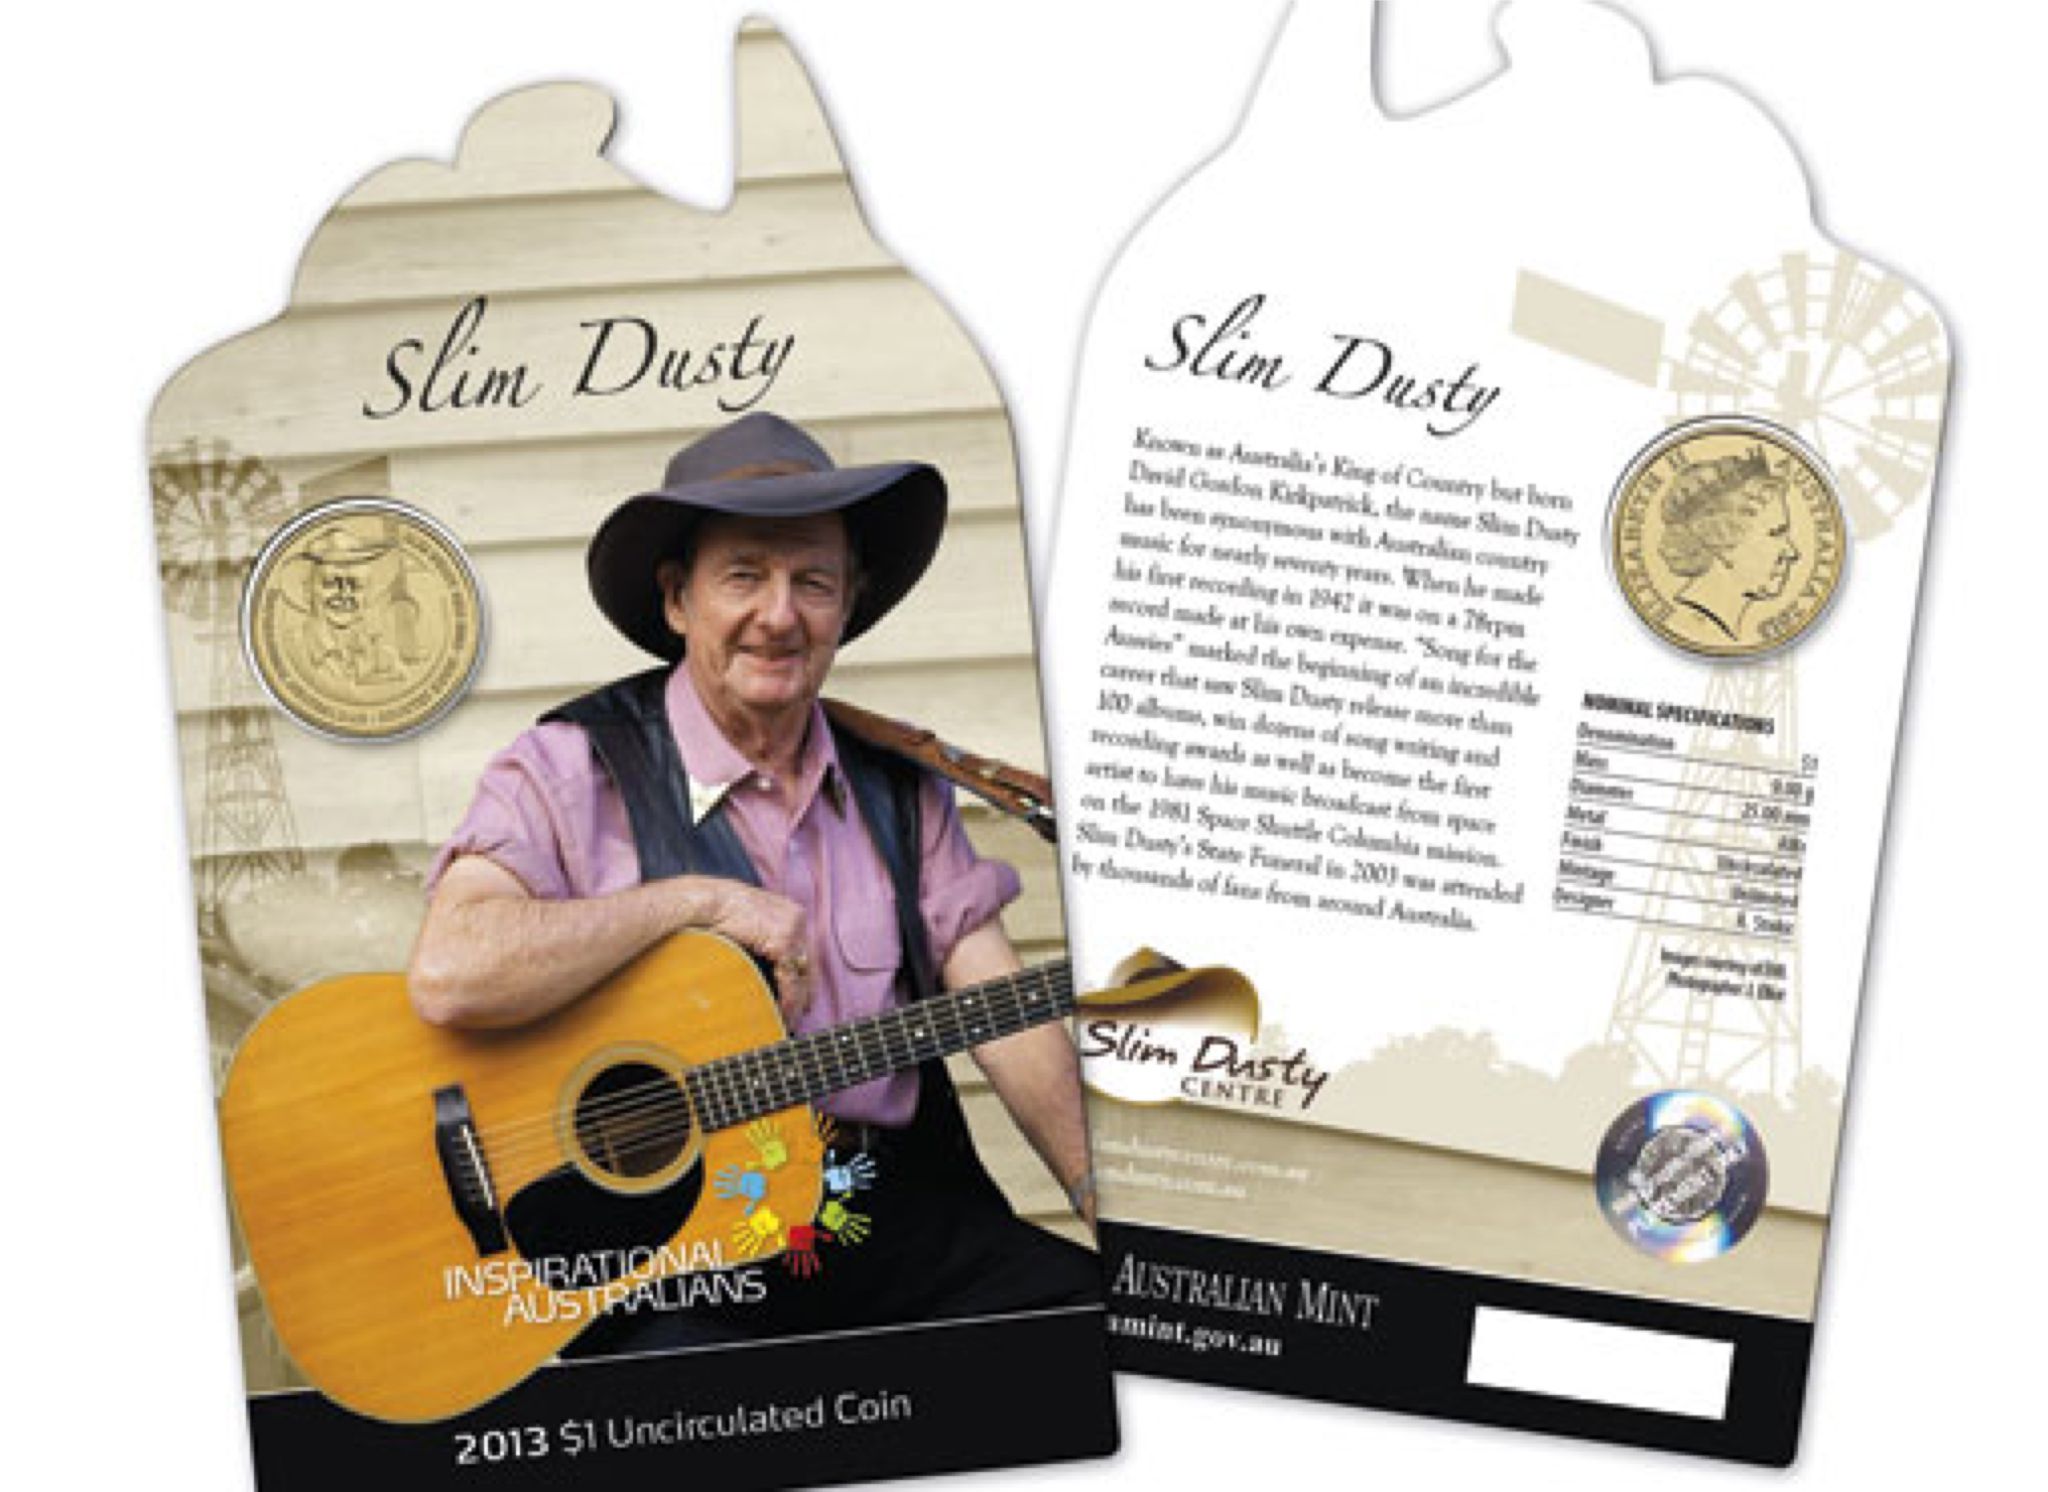 2013 $1 Uncirculated Coin Inspirational Australians - Slim Dusty  coin collectible [Barcode 9314683102816] - Main Image 1